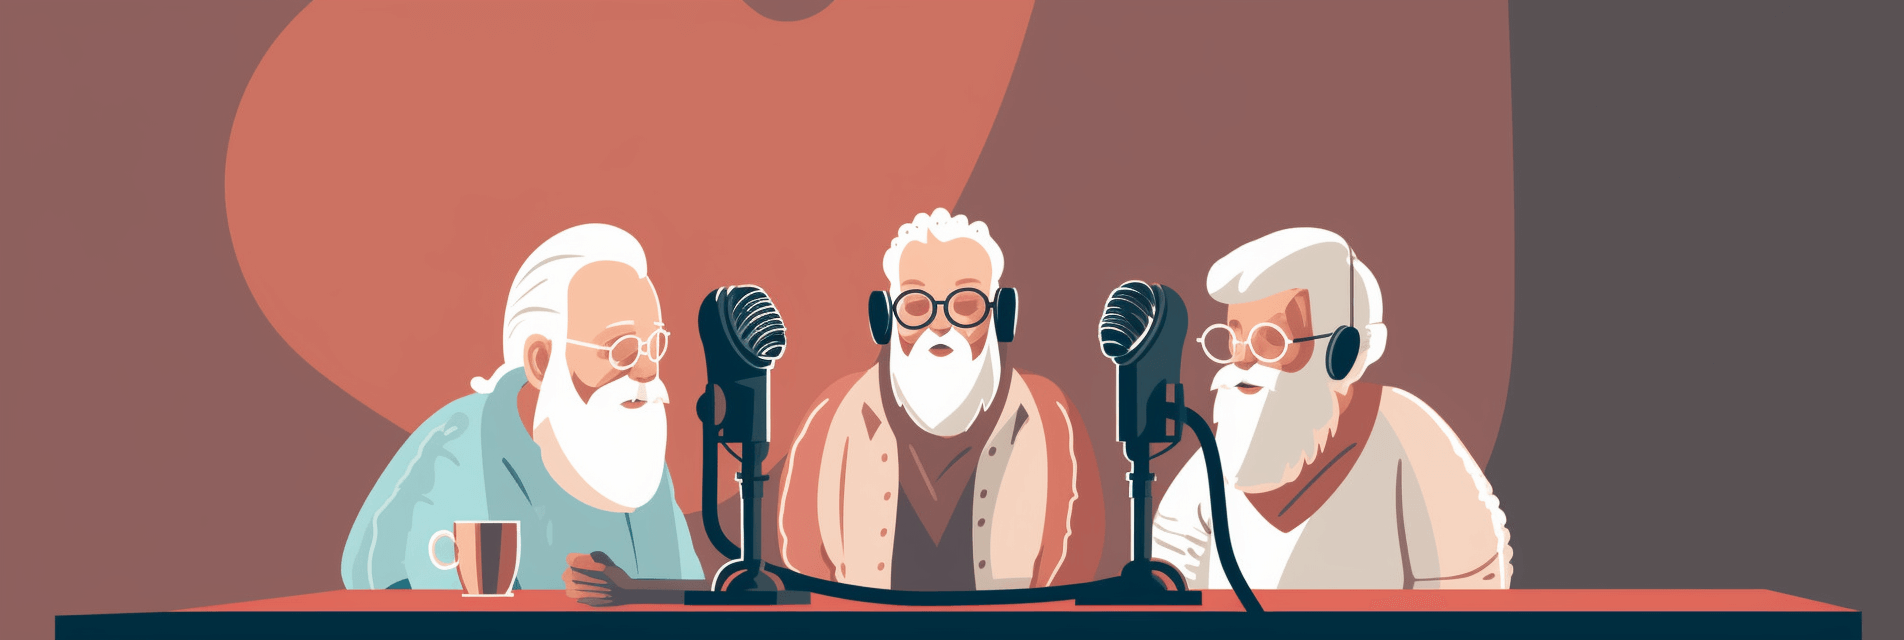 Zesty create an image featuring a podcast microphone elderly co 5c819f55 0364 4217 896c a6636f13fb26